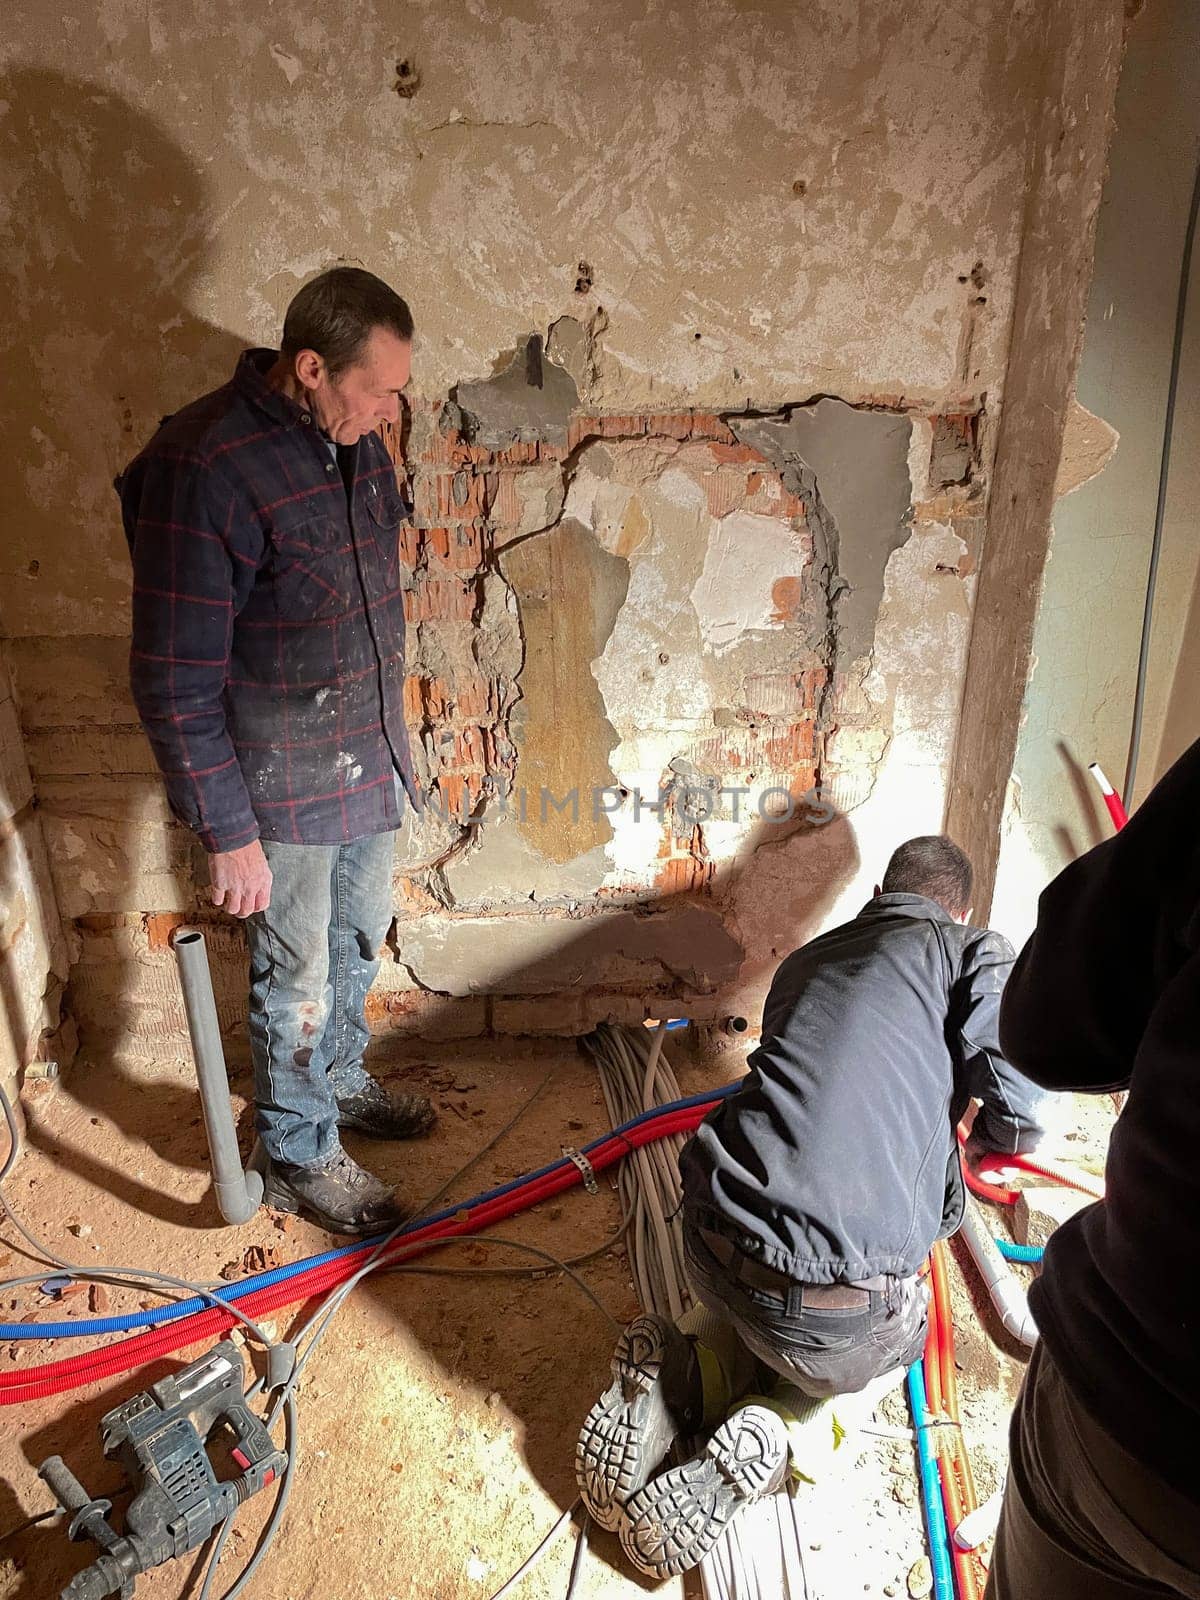 team of professional electricians is working at the construction site,operation specialists are installing wiring in the house inside the walls, High quality photo